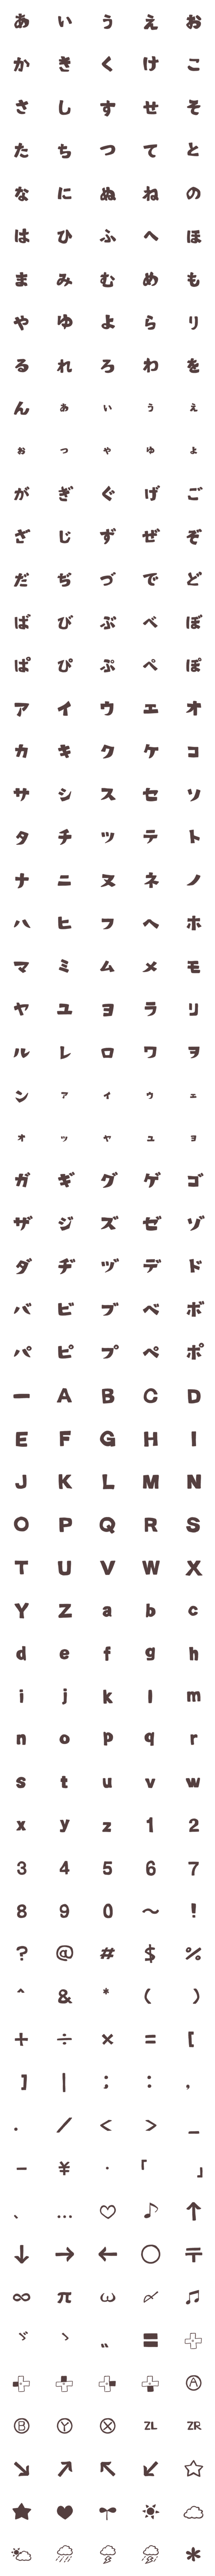 [LINE絵文字]*使いやすい手書き文字*ナチュラル*の画像一覧